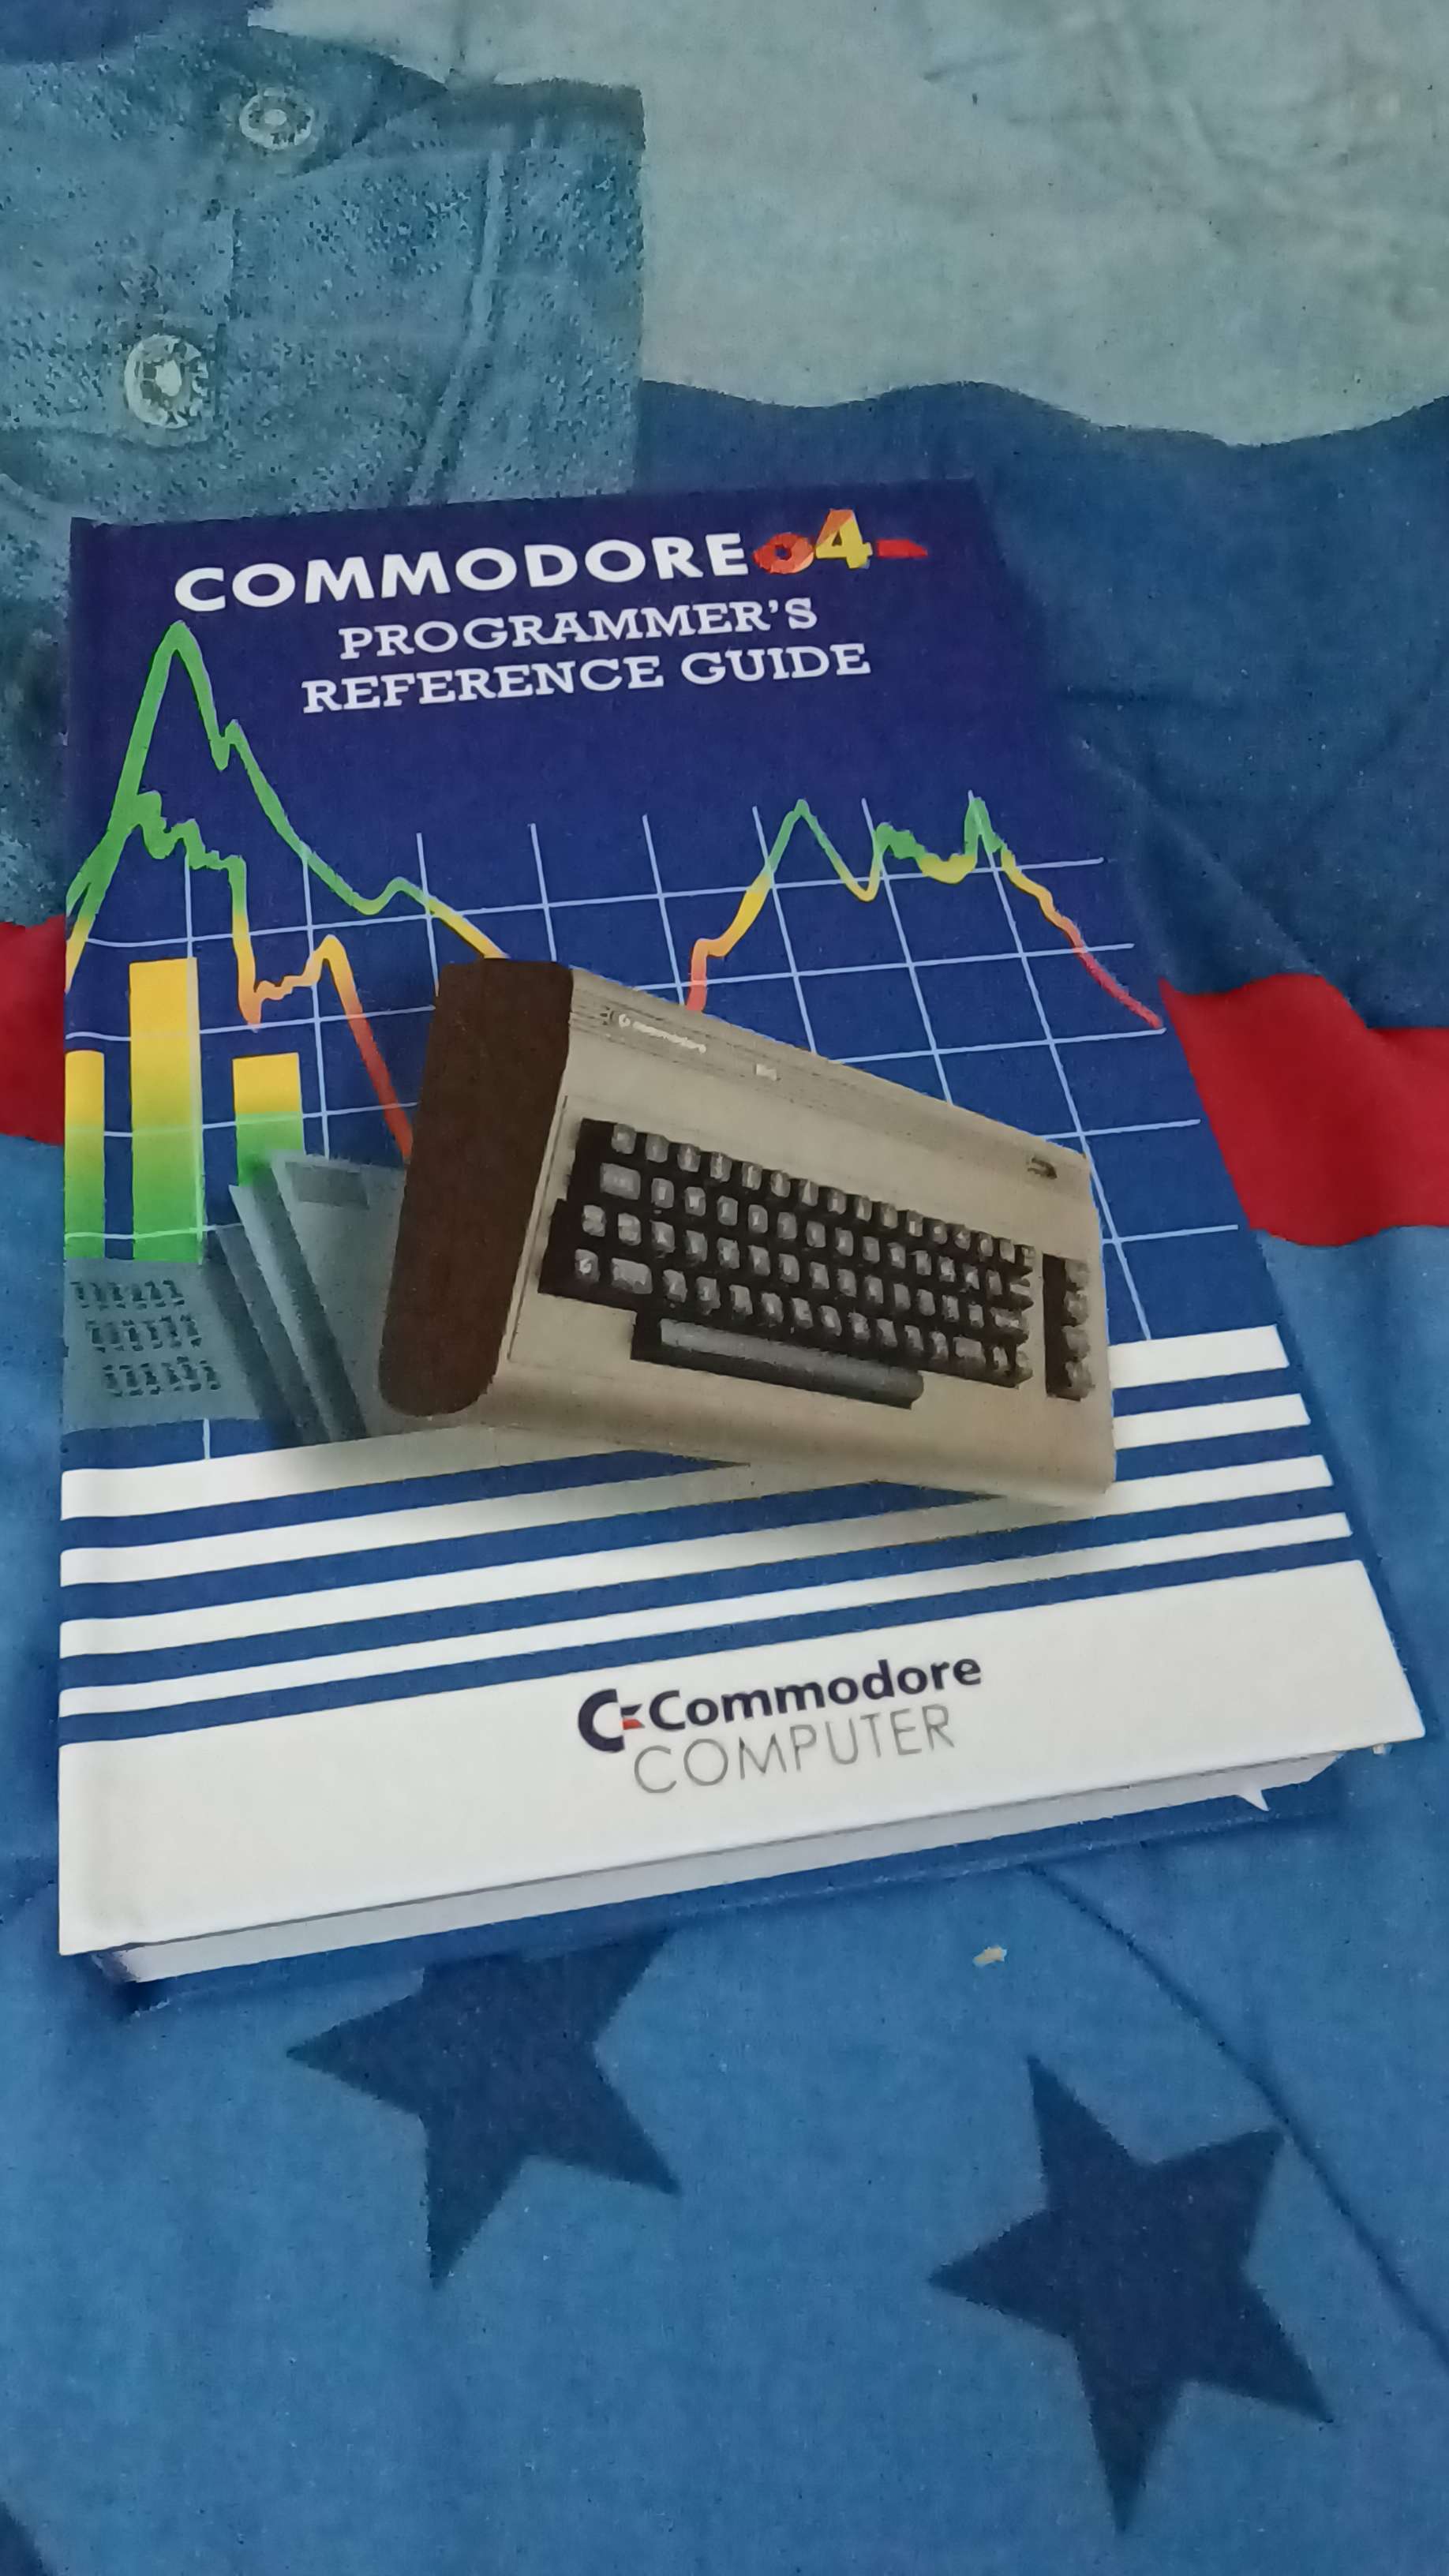 Commodore 64: Programmer's reference guide